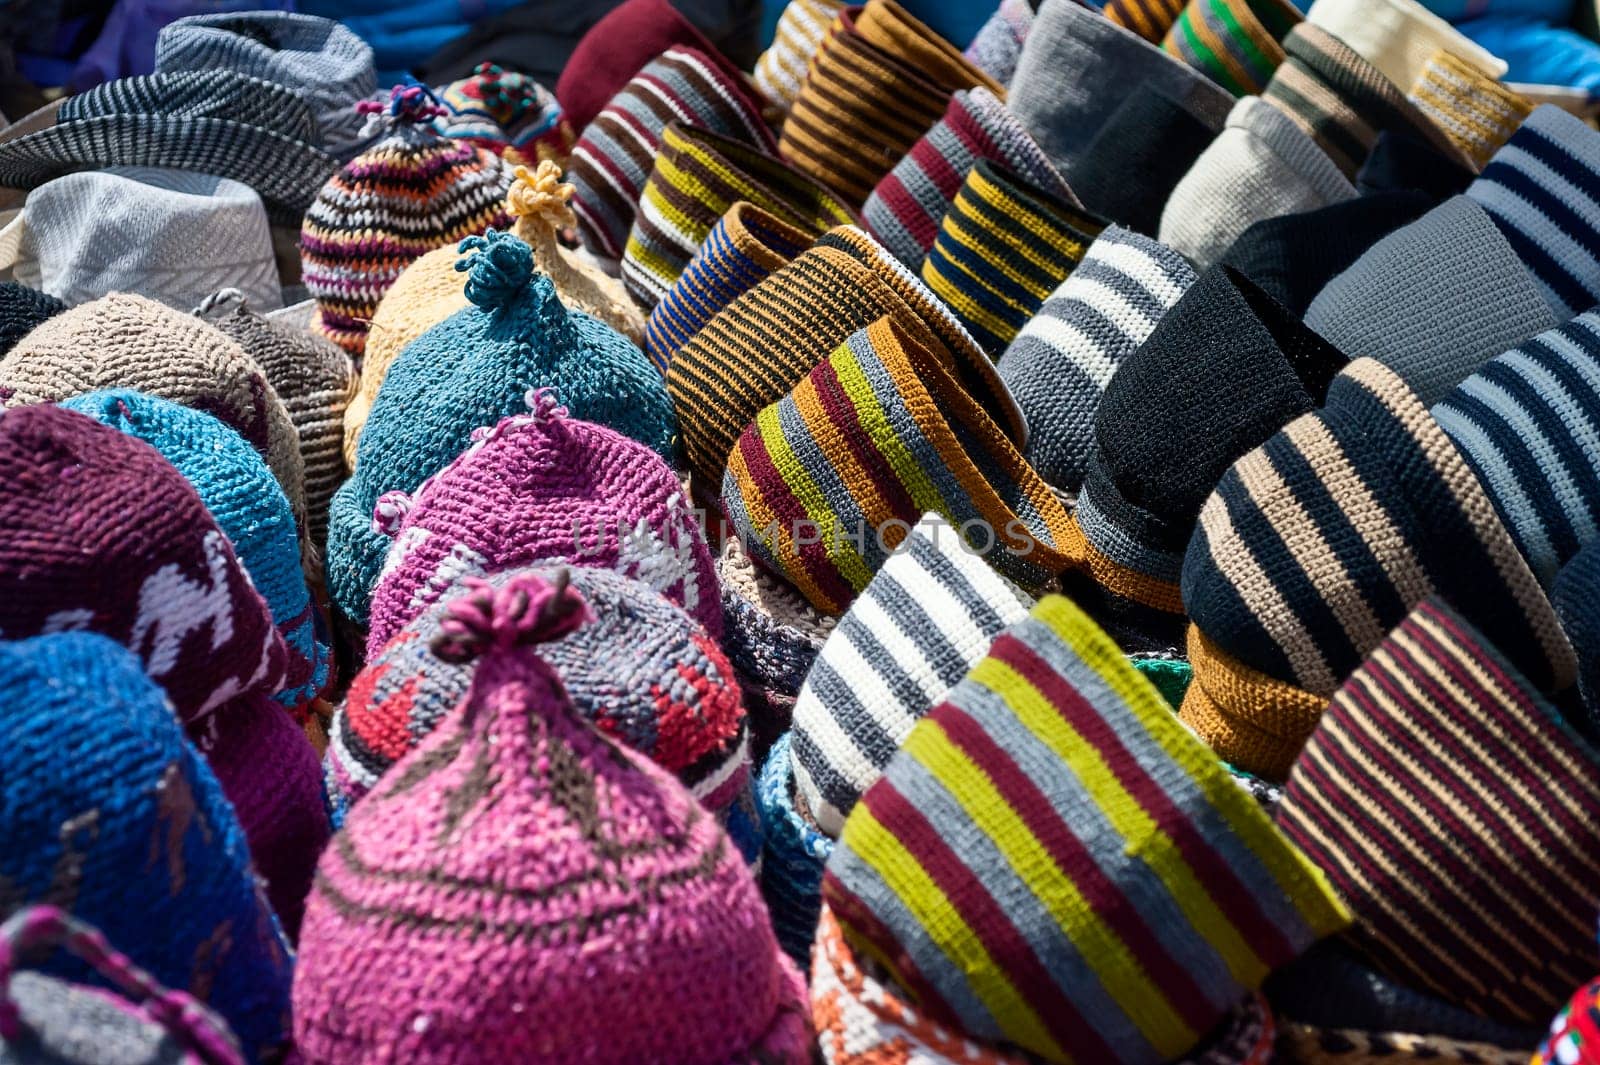 Hats for sale in the Souk of Marrakech, Morocco